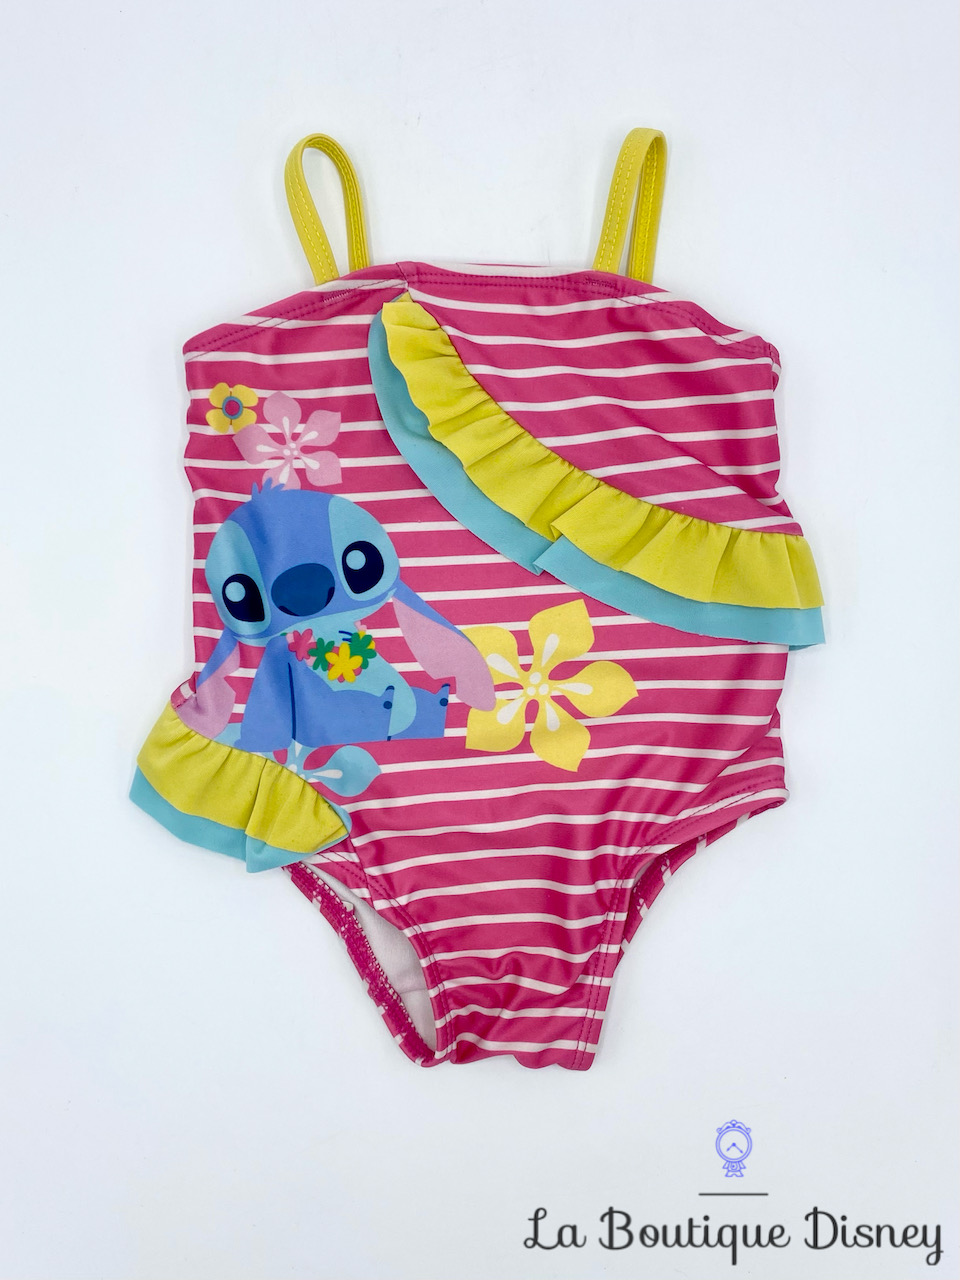 Maillot de bain Stitch Disney Baby by Disney Store taille 6-9 mois rayures rose jaune